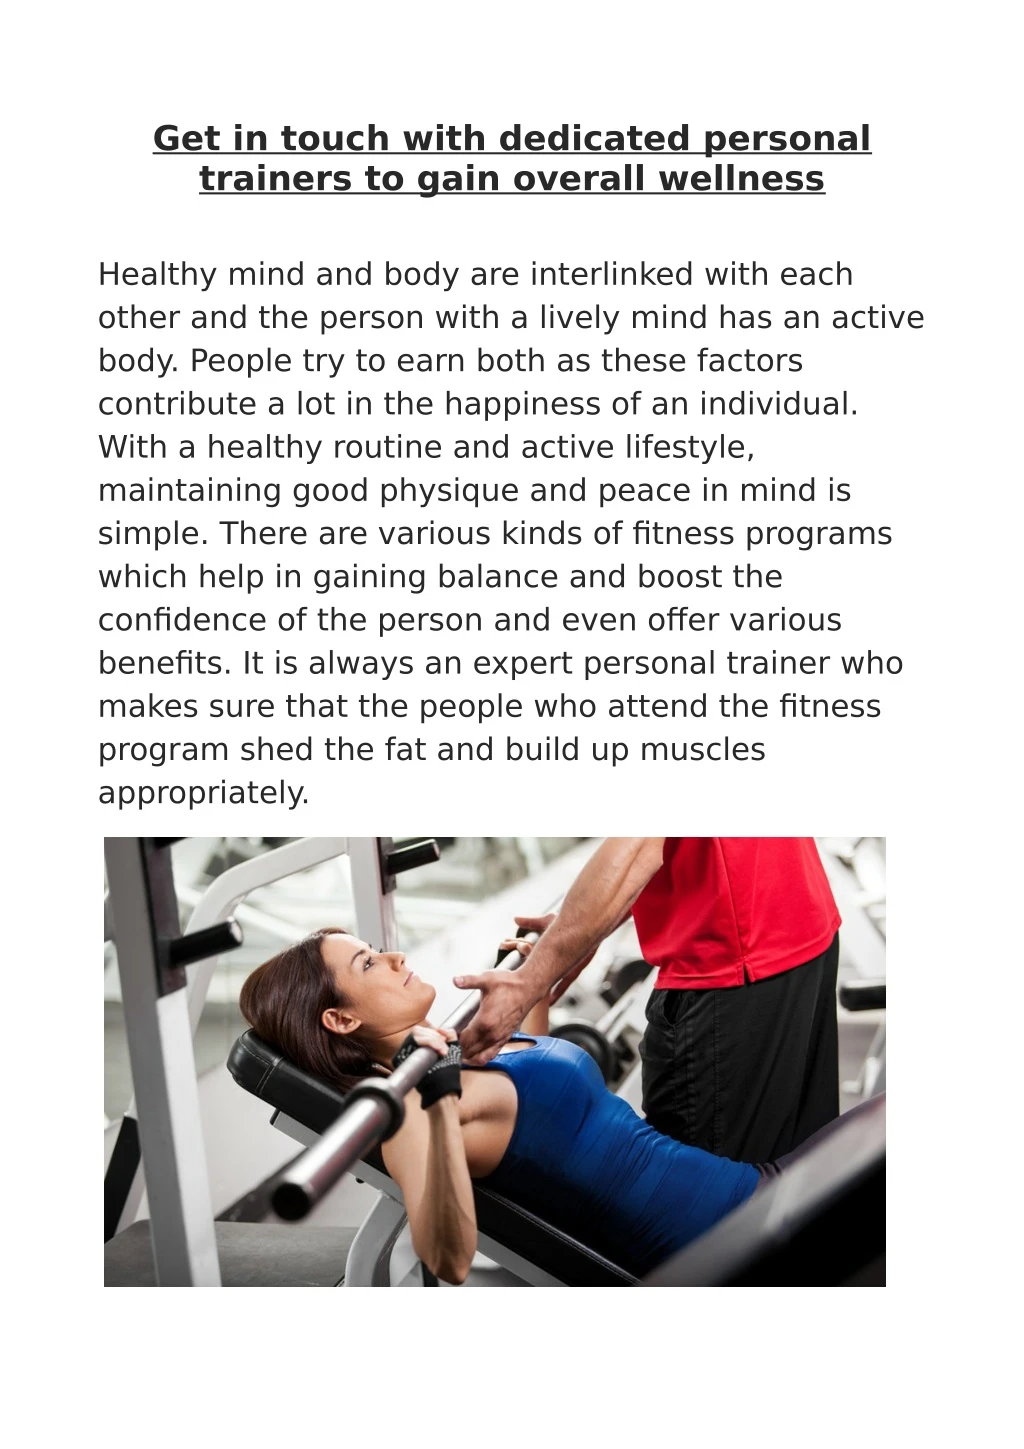 get in touch with dedicated personal trainers